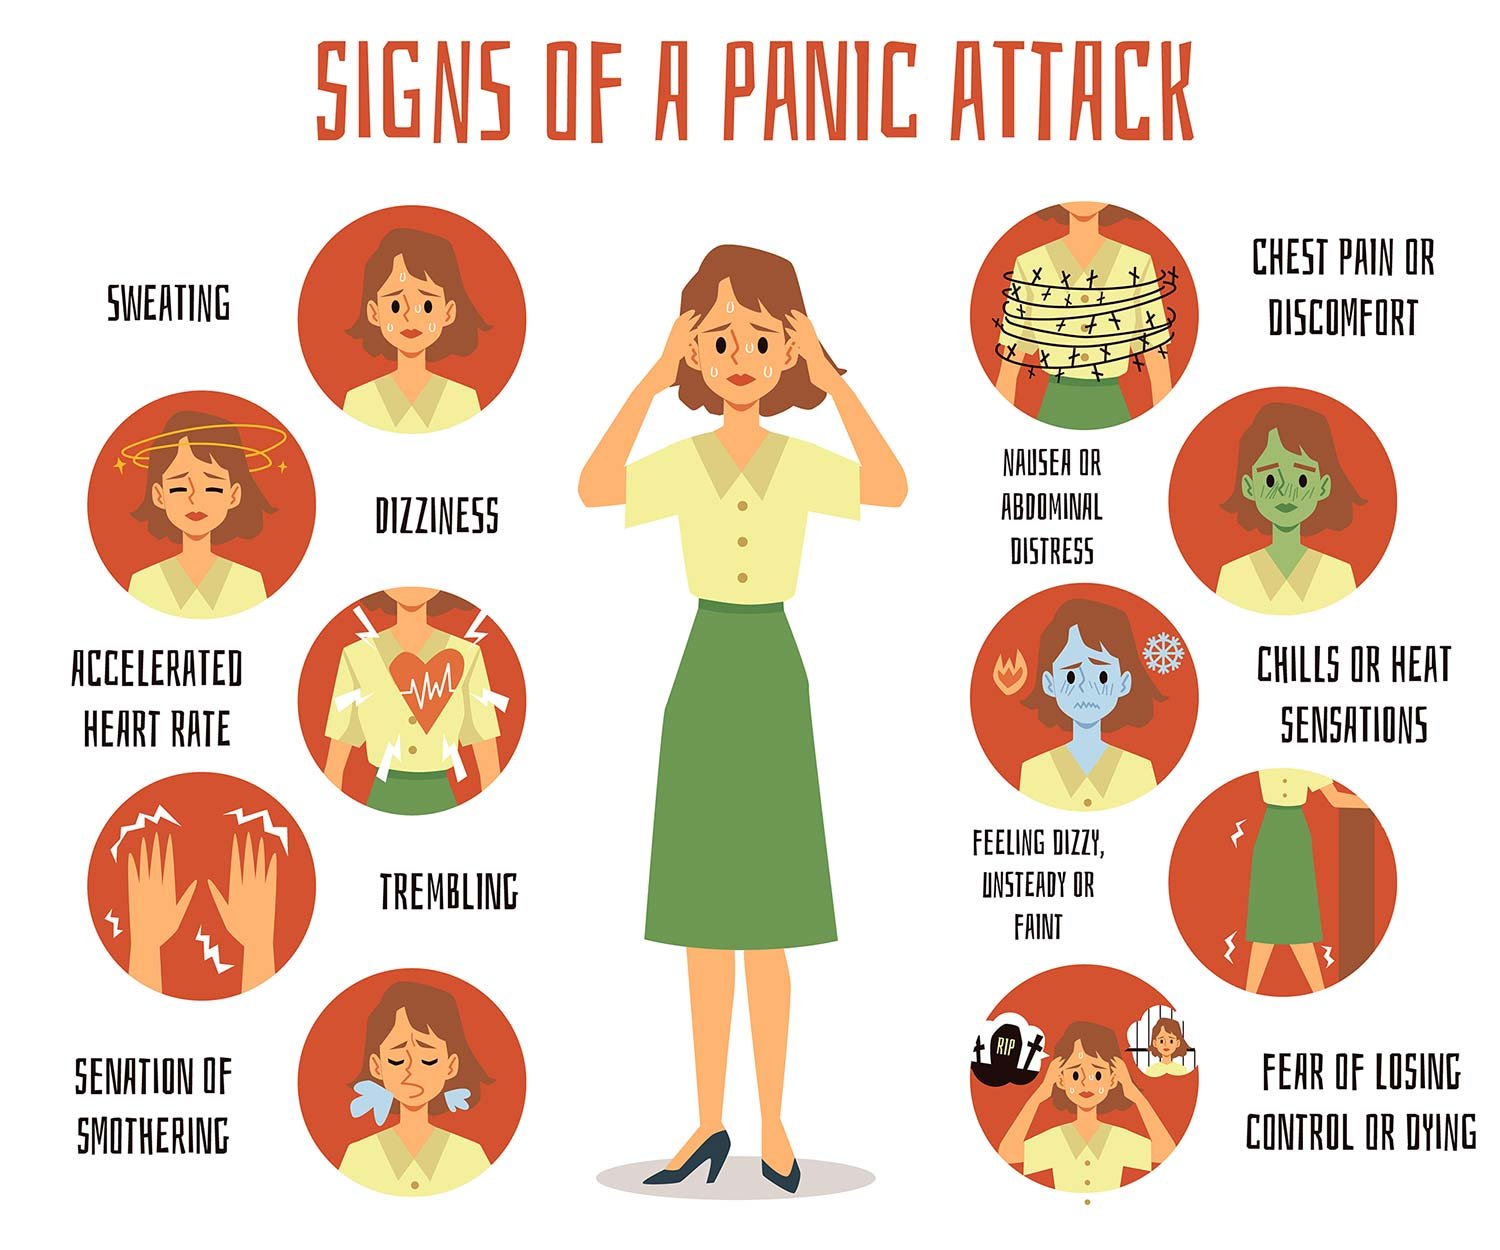 Bodily symptoms of a panic attack in both PTSD and Panic disorder